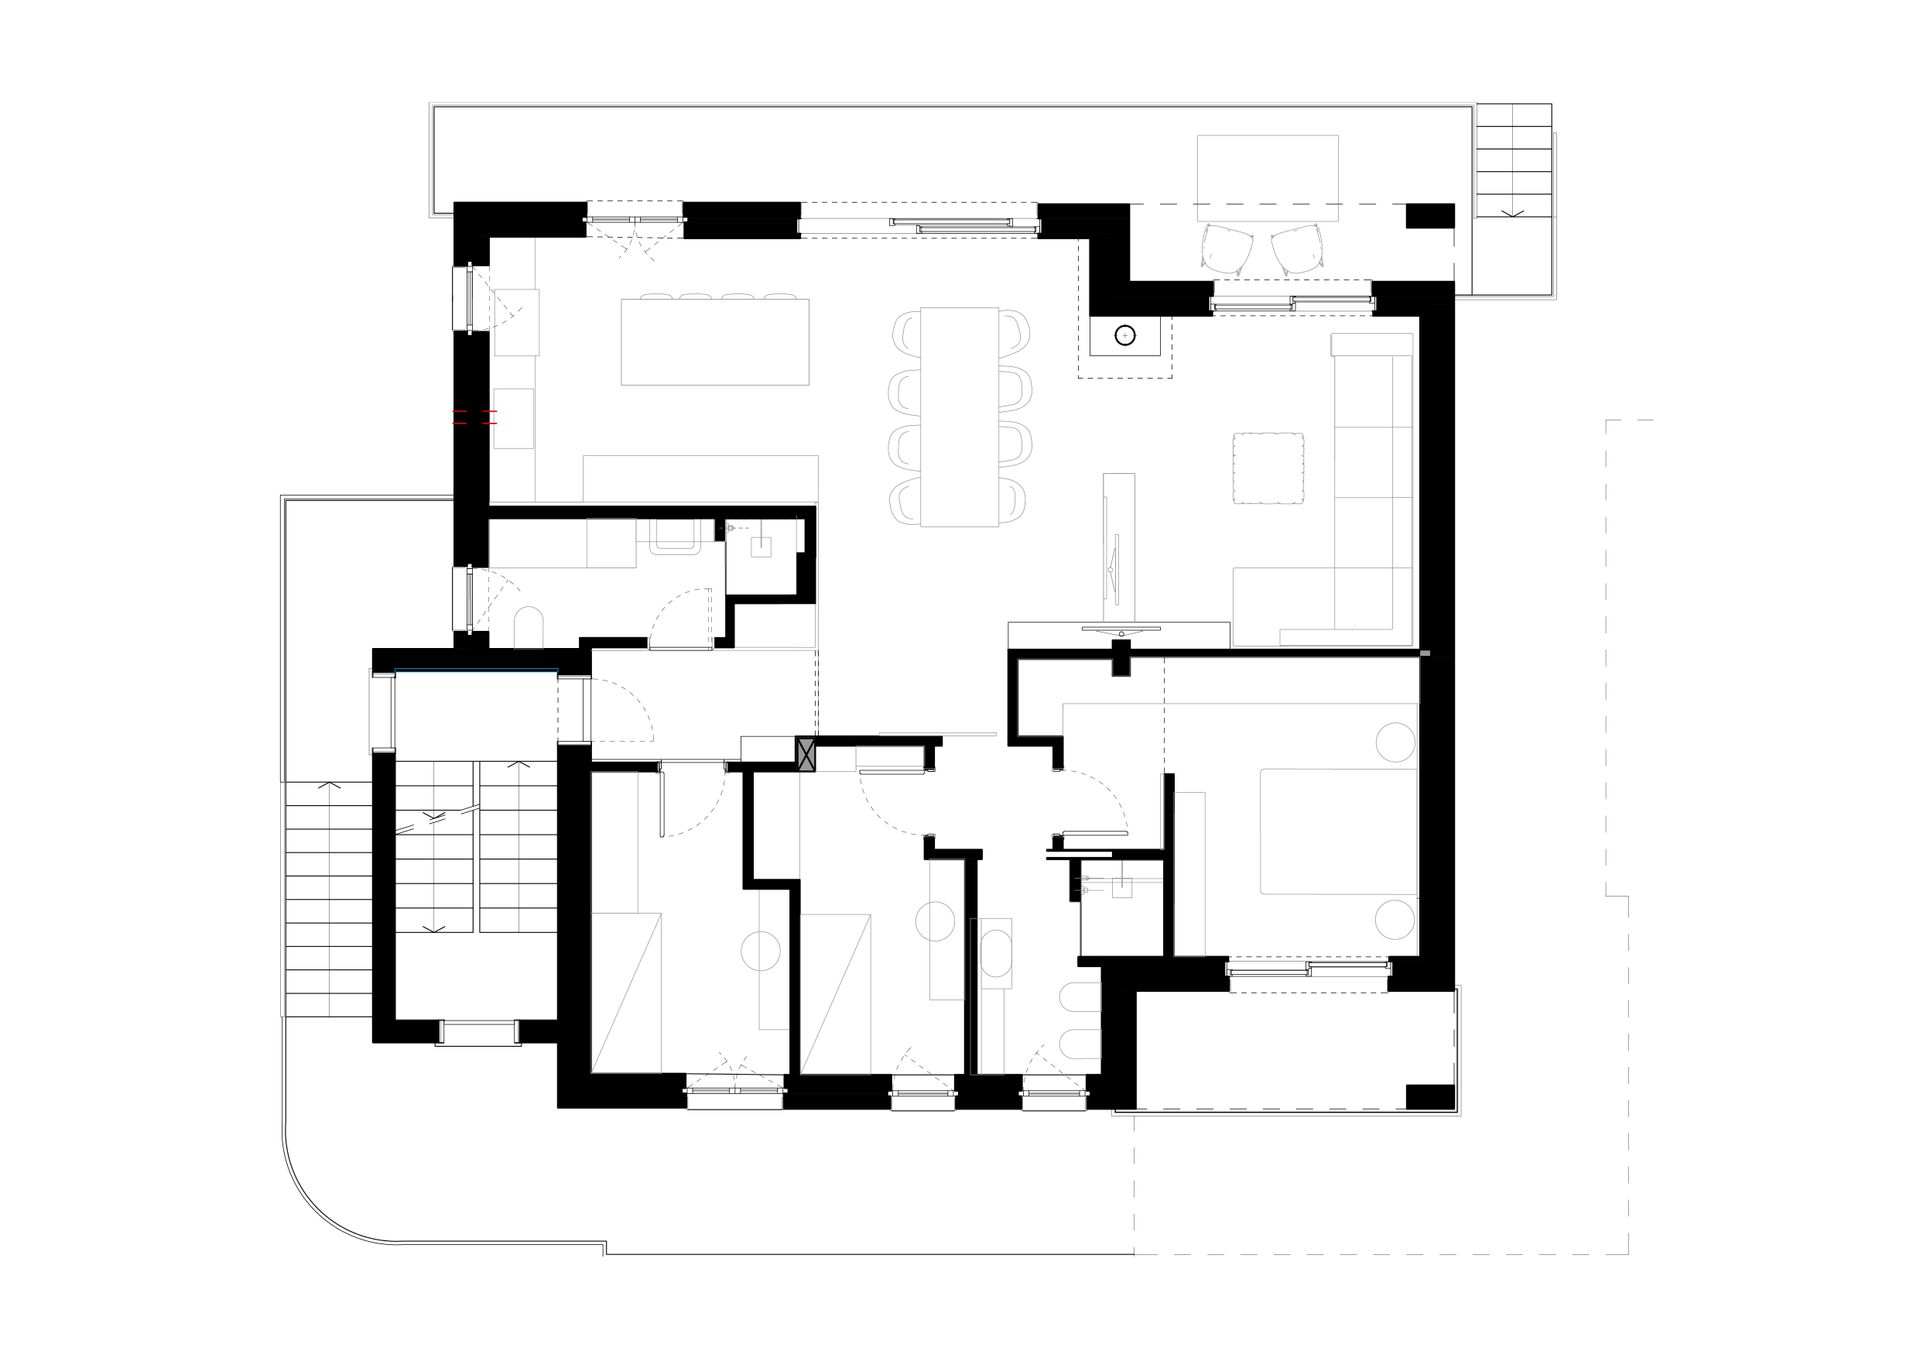 Interior design project, apartment renovation big living room, central column with paneling, large terrace. Officina Magisafi architecture design - floor plan